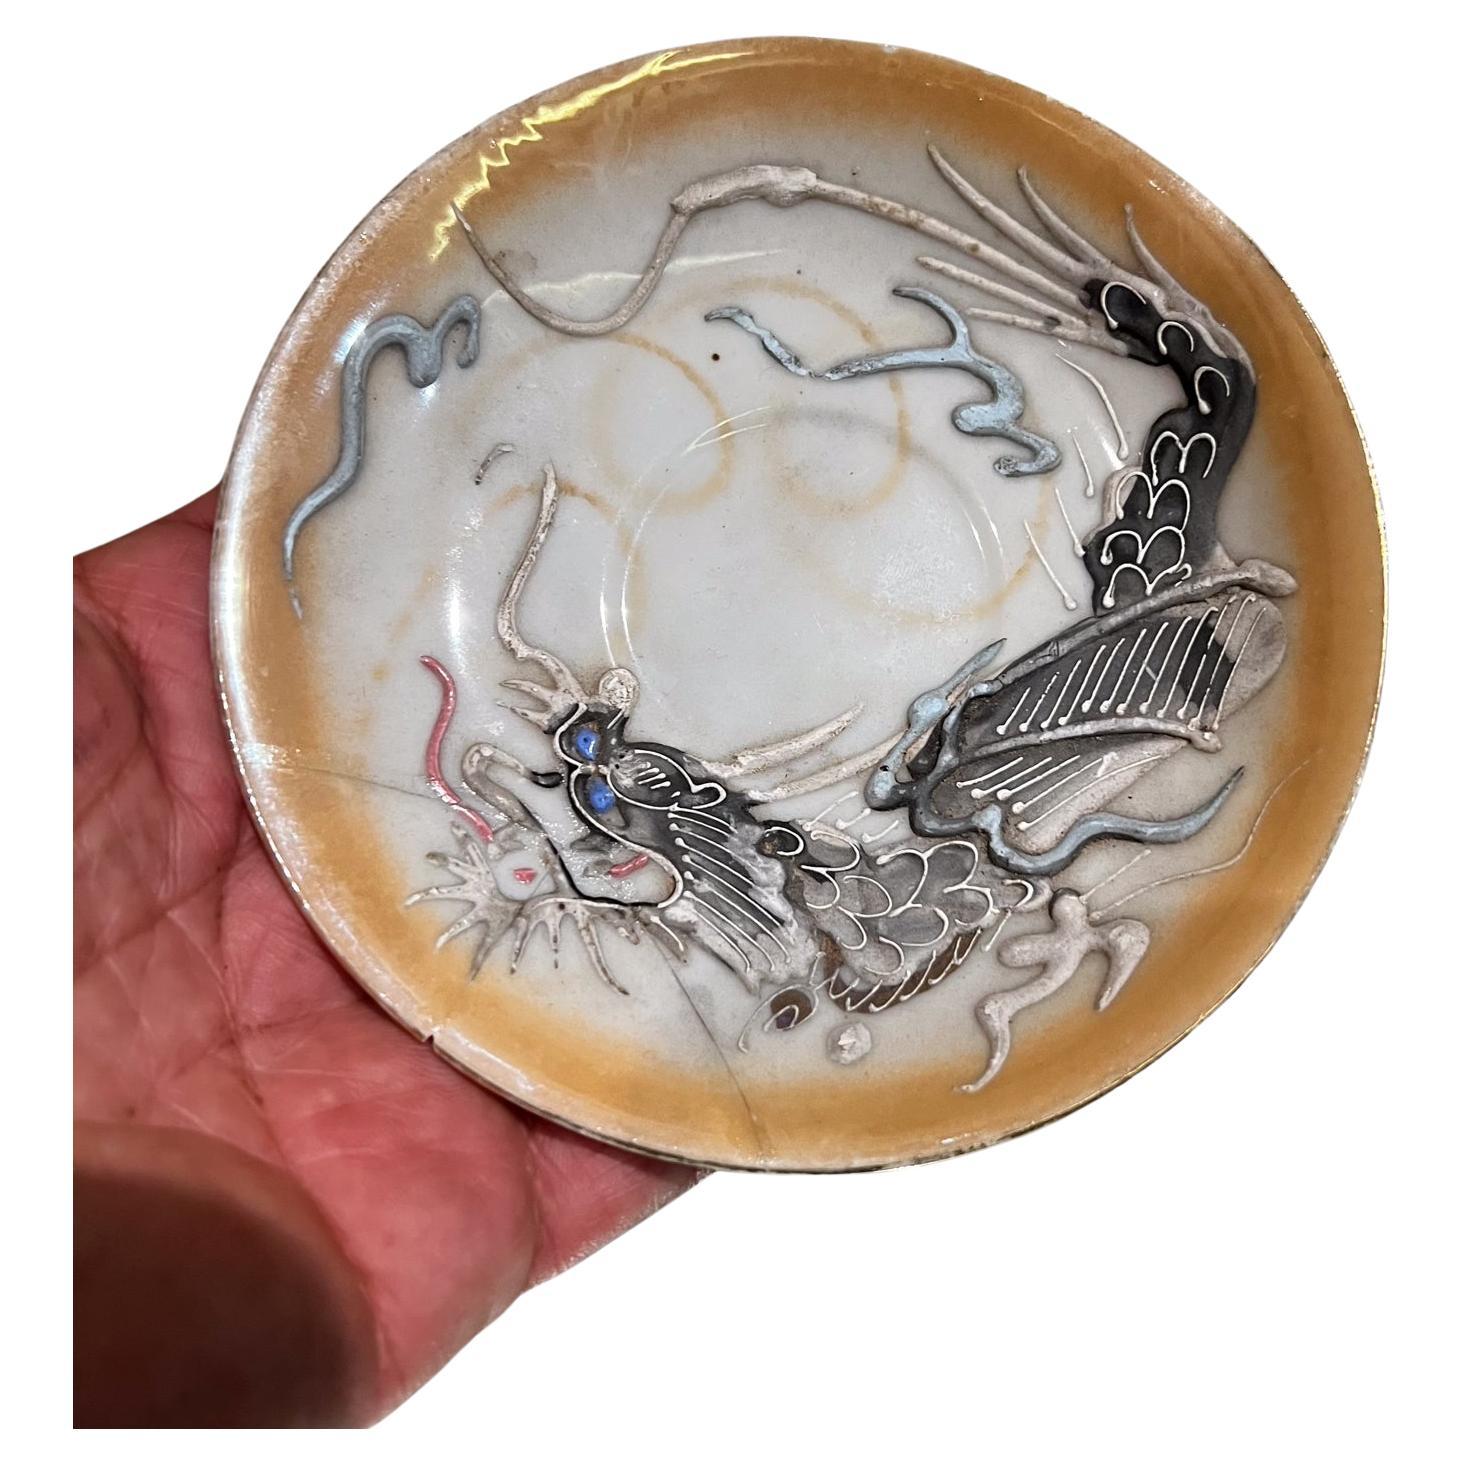 Antique Porcelain Japanese Dragon Handcrafted Saucer Plate
Labelled Lucky
4.75 diameter x .75 H
Original vintage unrestored condition. Distressed and has a prior restoration.
Repair visible on the back.
Refer to all images.